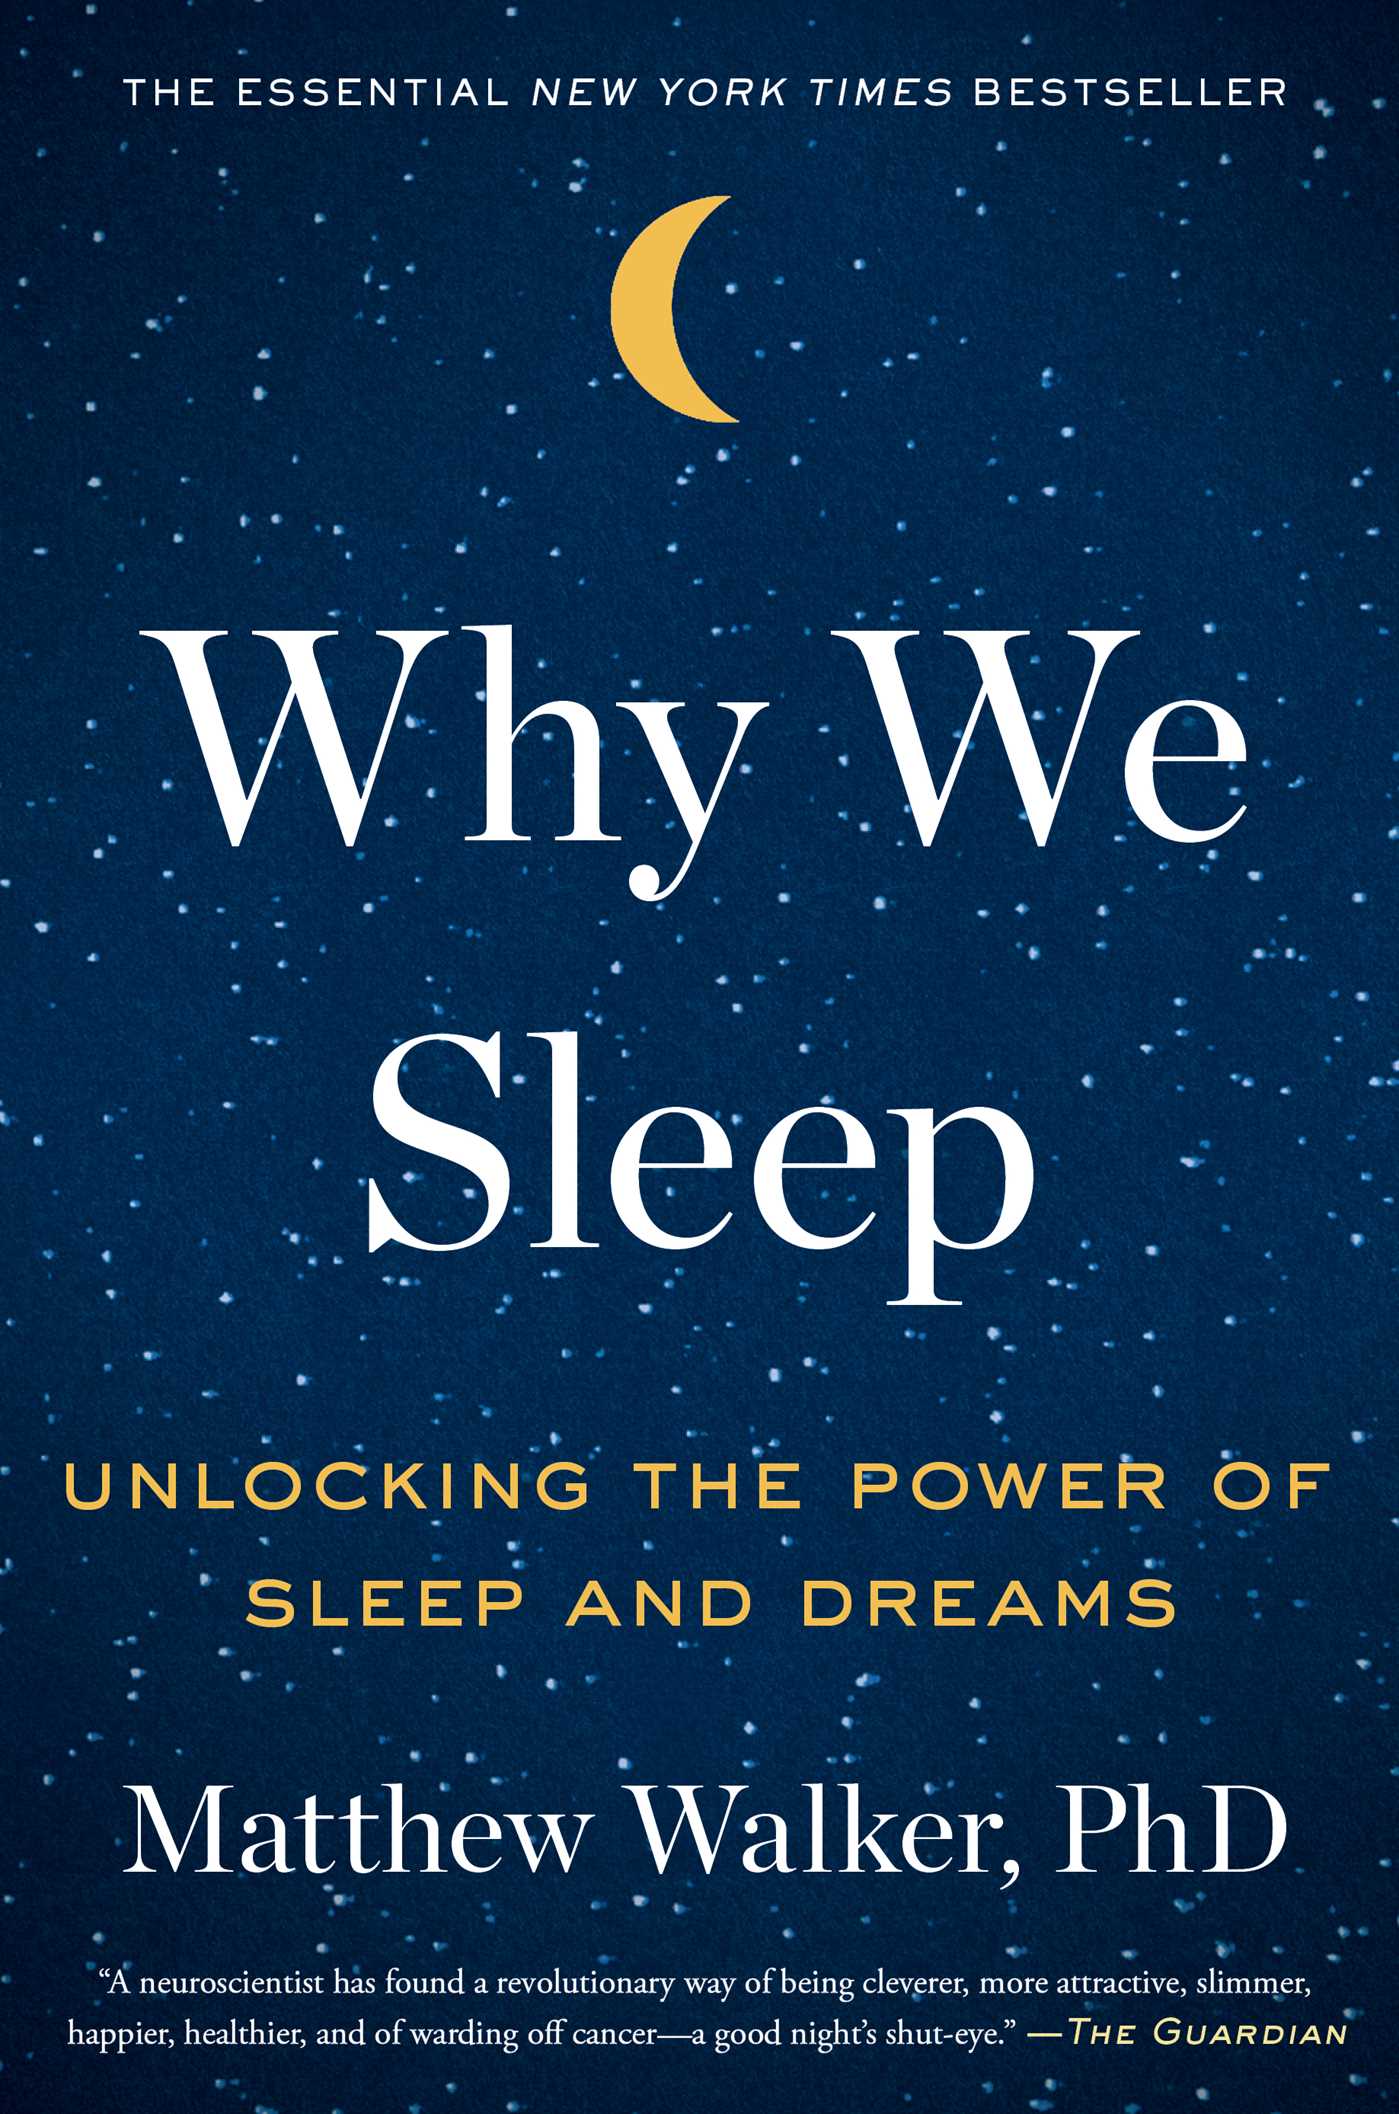 Further Thoughts On “Why We Sleep”